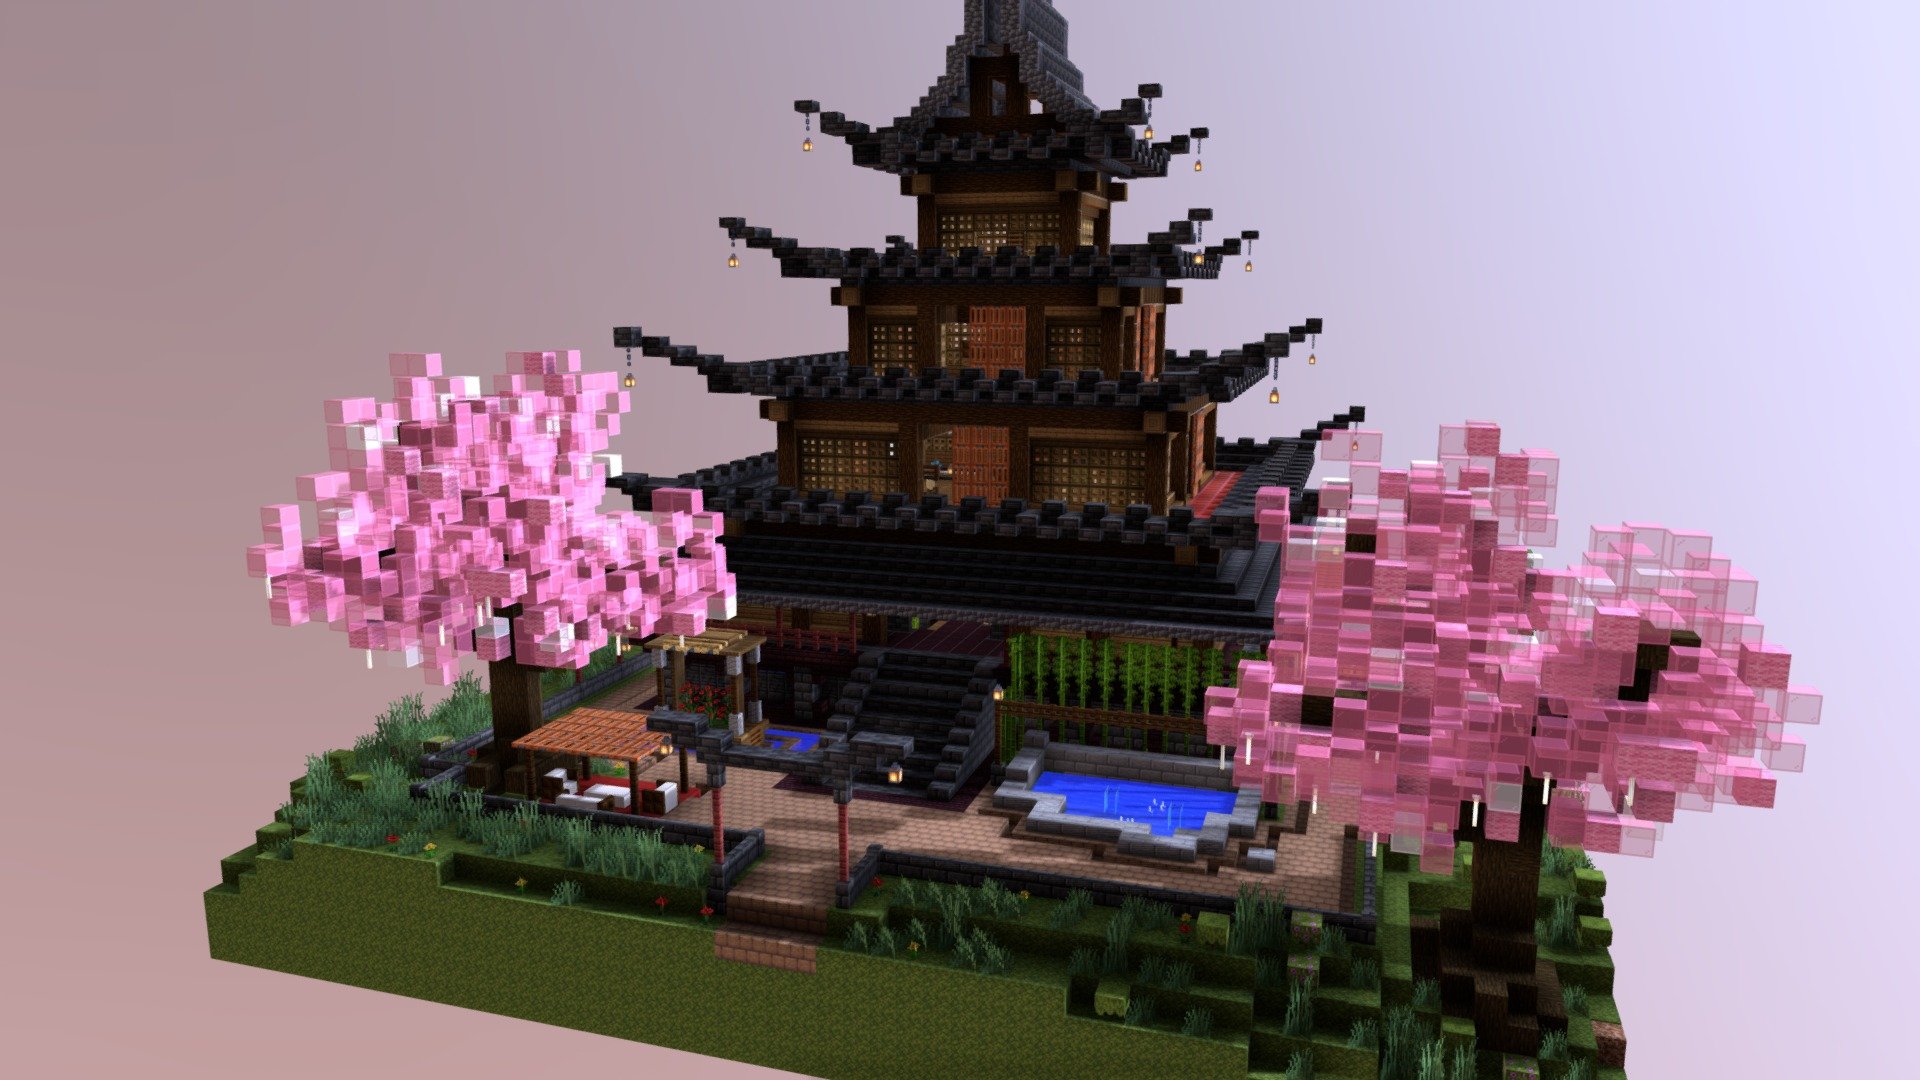 A good way for one to practice world edit.

It is one of the Japanese-themed buildings Ι made for the server:

Rainbow Multiverse

(IP: play.minecraft.gr)

Official website: www.minecraft.gr - Japanese Temple - Minecraft Build - 3D model by Eleni Gorgogianni (@elenigorgogianni) 3d model